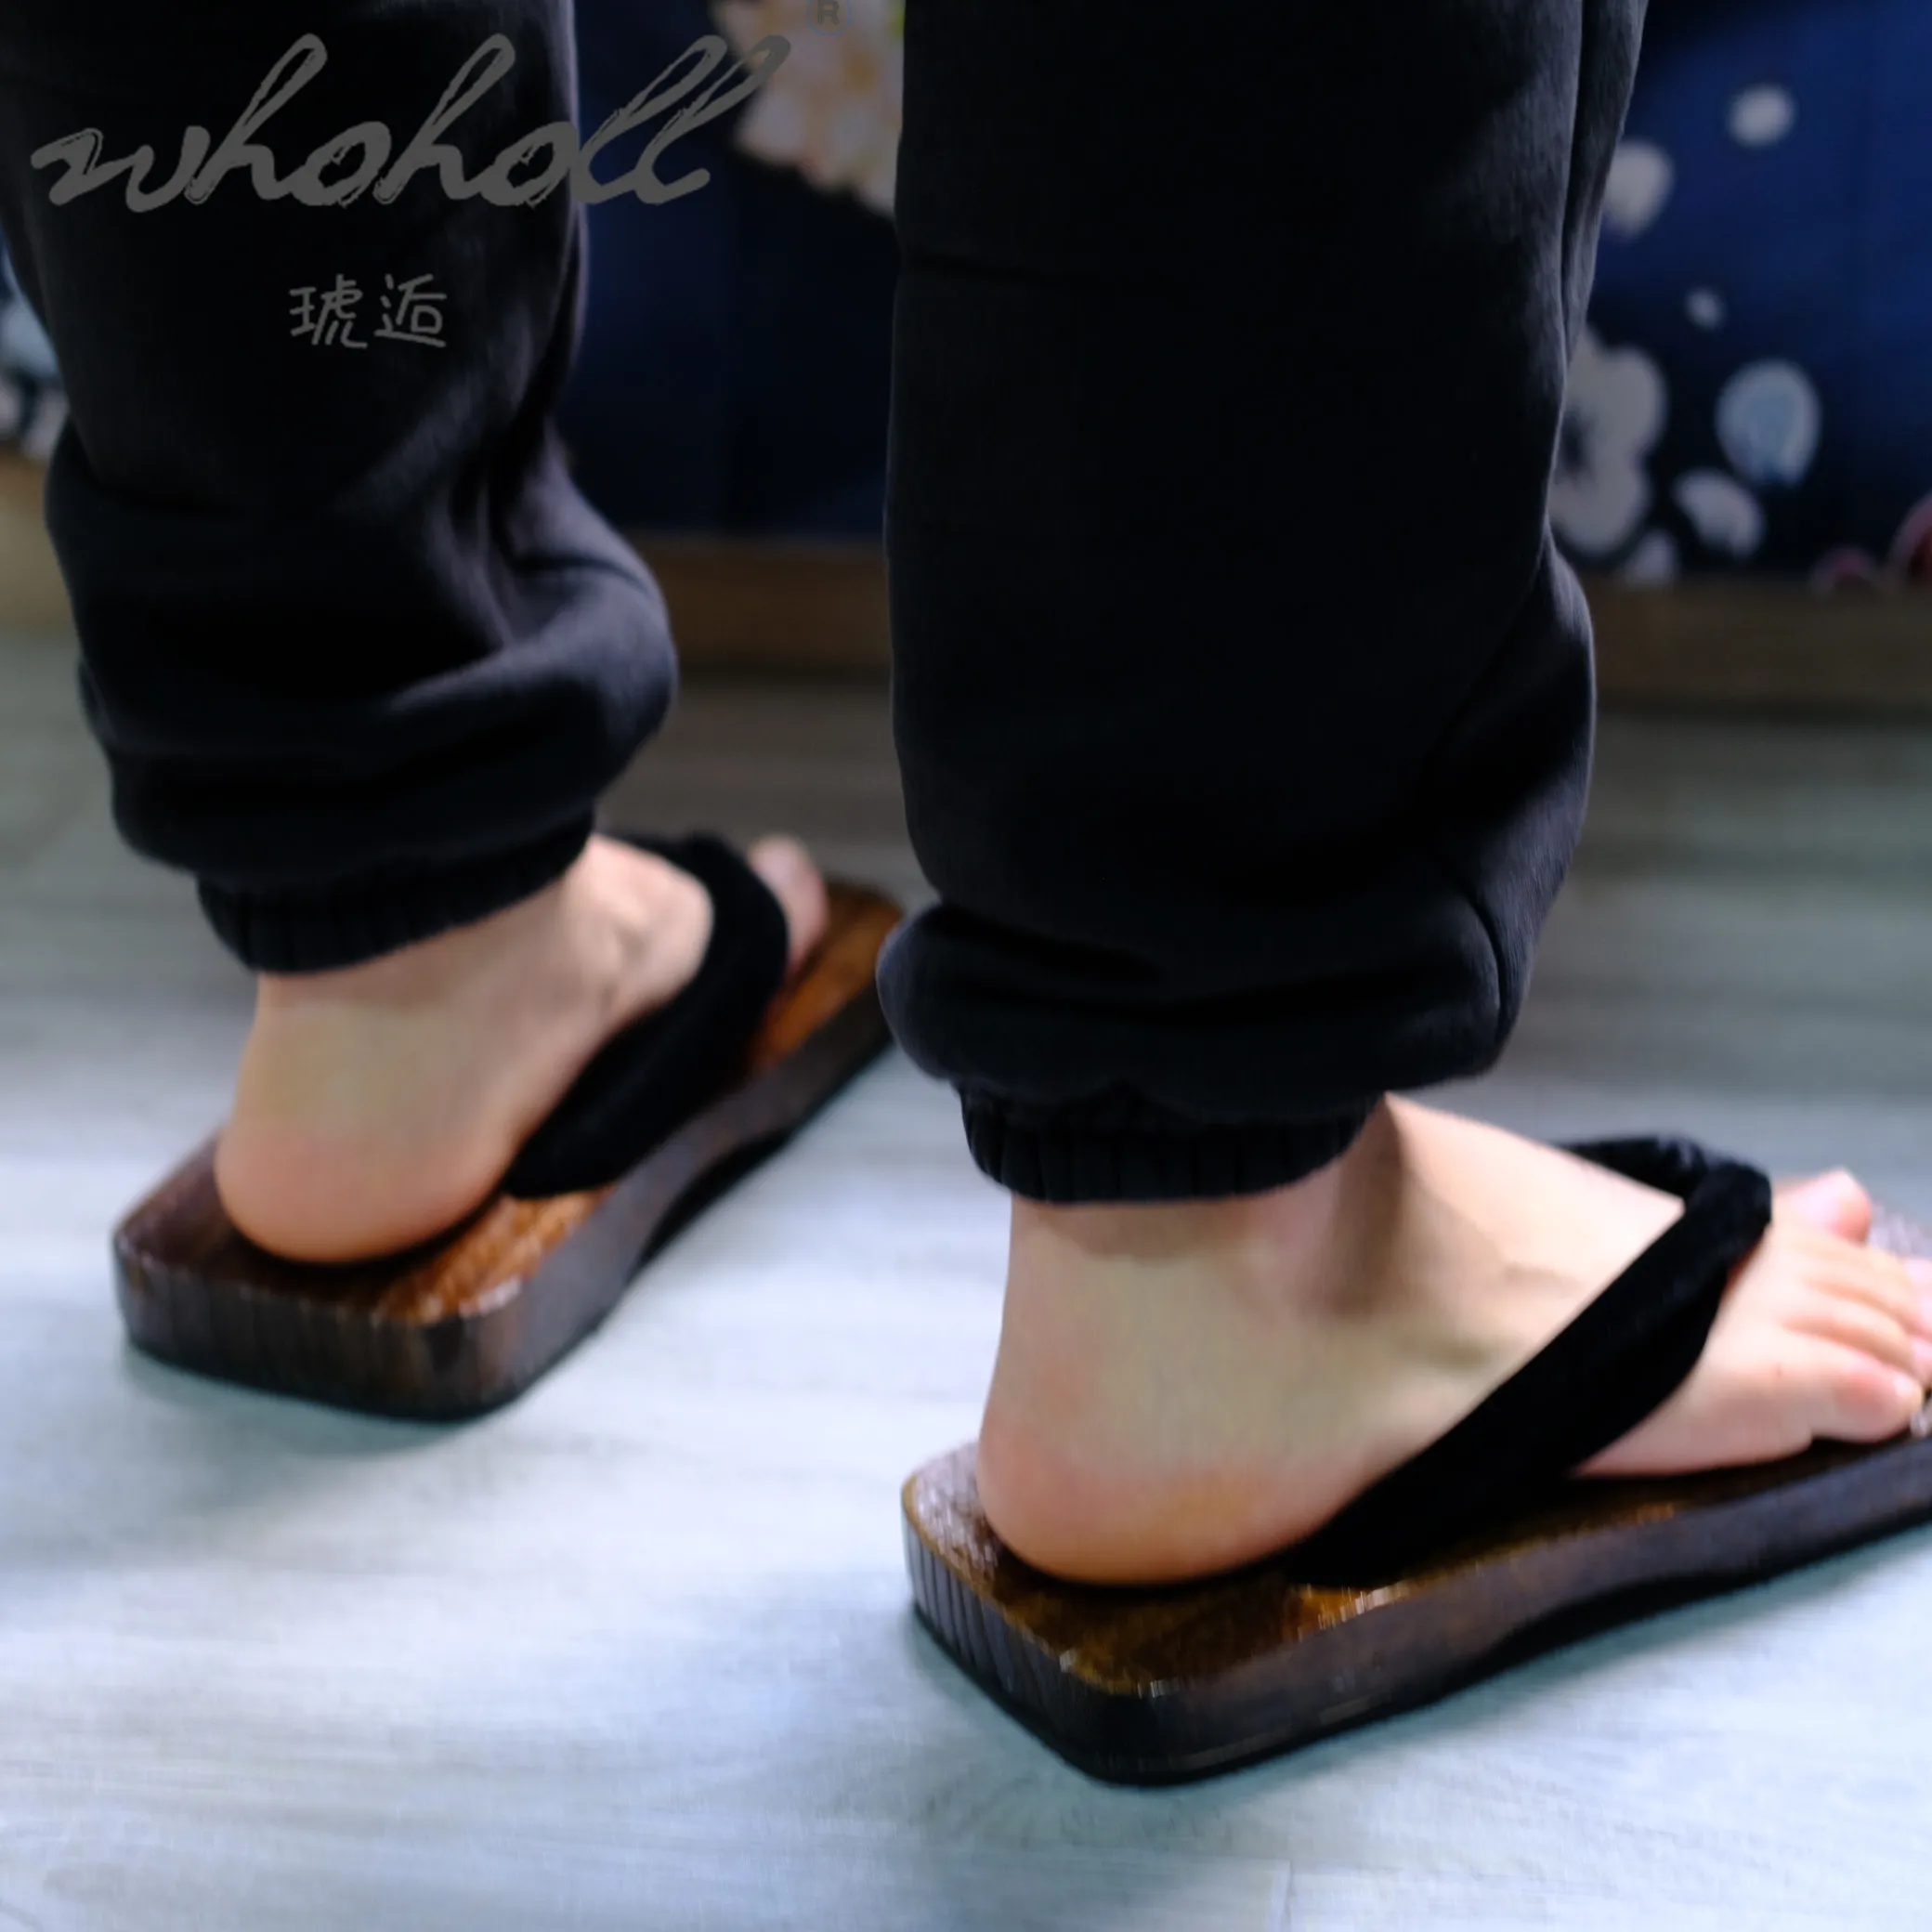 Man Slippers Japanese Geta Flip Flops Anime Demon Slayer Wood Thick Sole Coplay Shoes Slippers Japanese Clogs Sandals images - 6